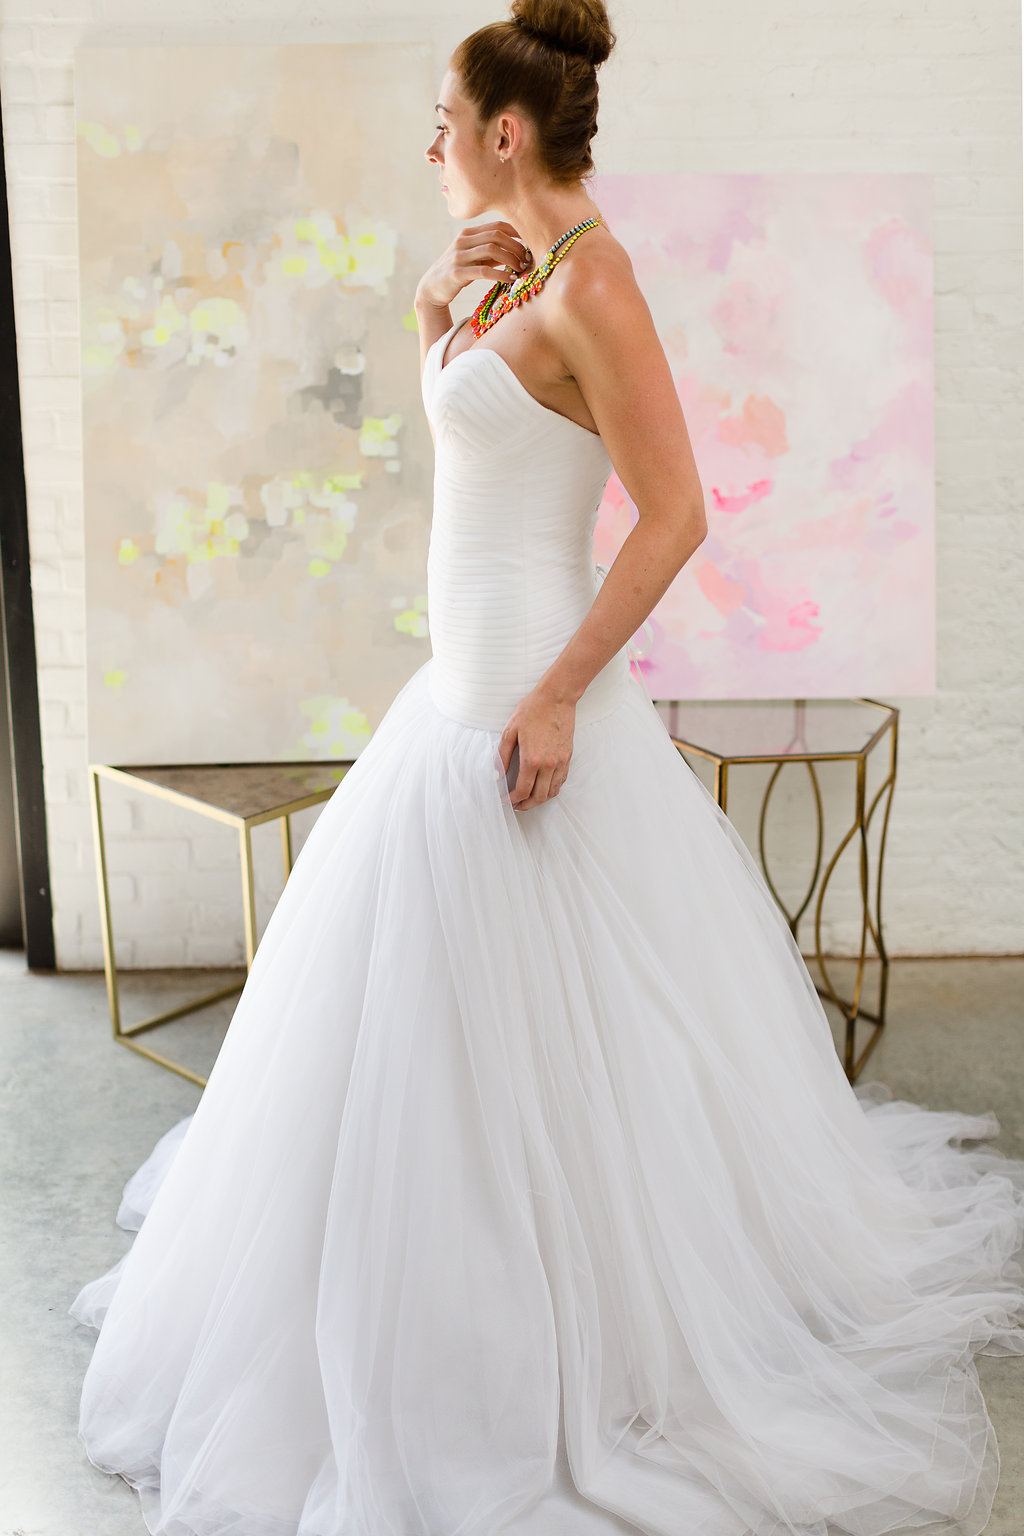 Wedding Dress for a Modern Neon Inspired Celebration / dress from Designer Loft NYC / photo by Jessica Haley Photography